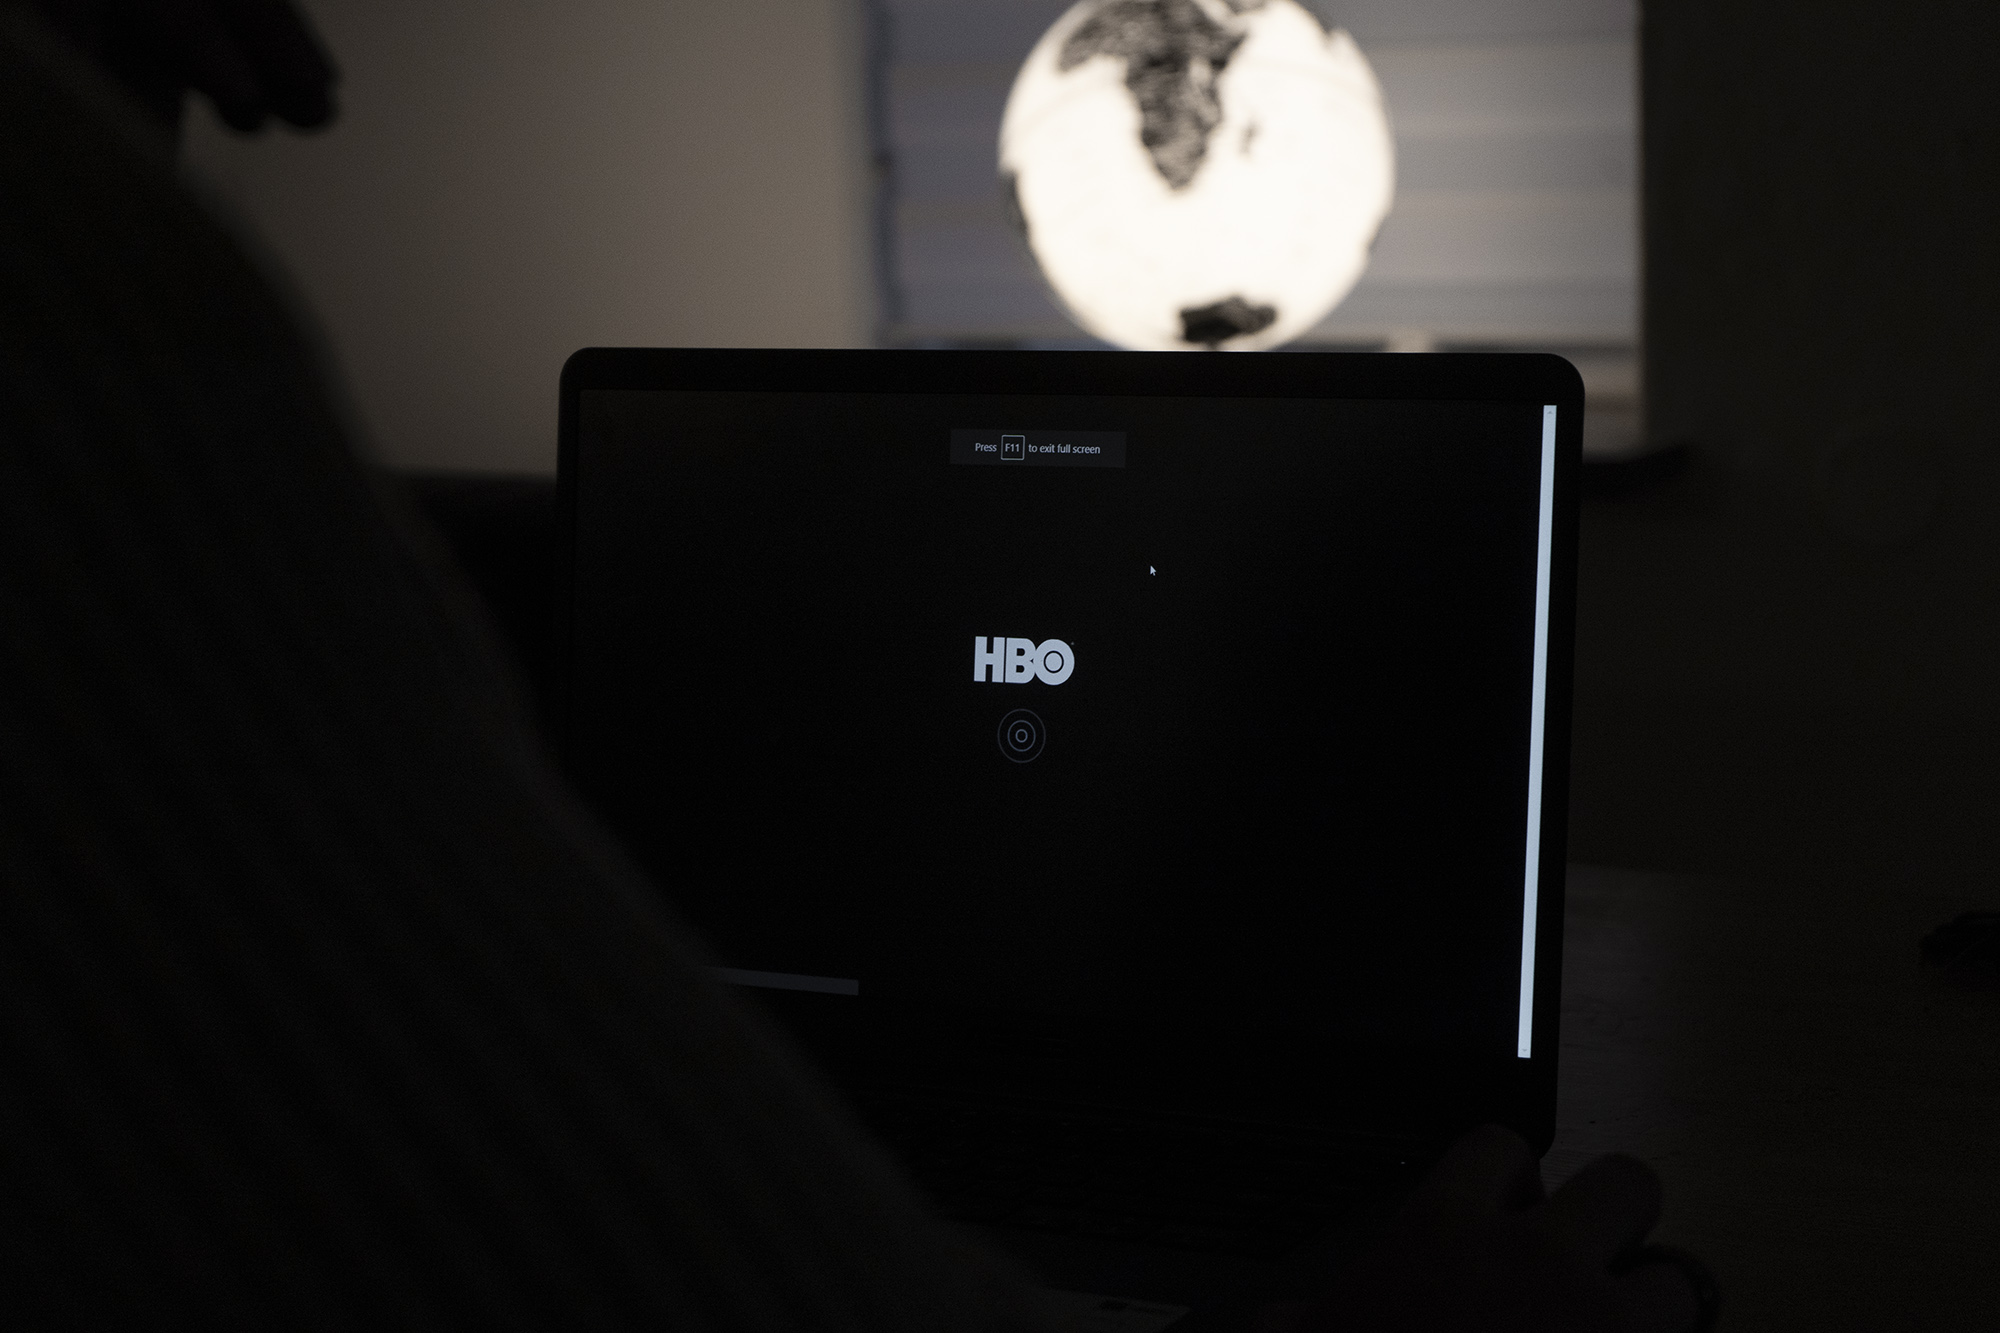 Fremkald I virkeligheden fiber How to Watch HBO Nordic Outside of Supported Countries